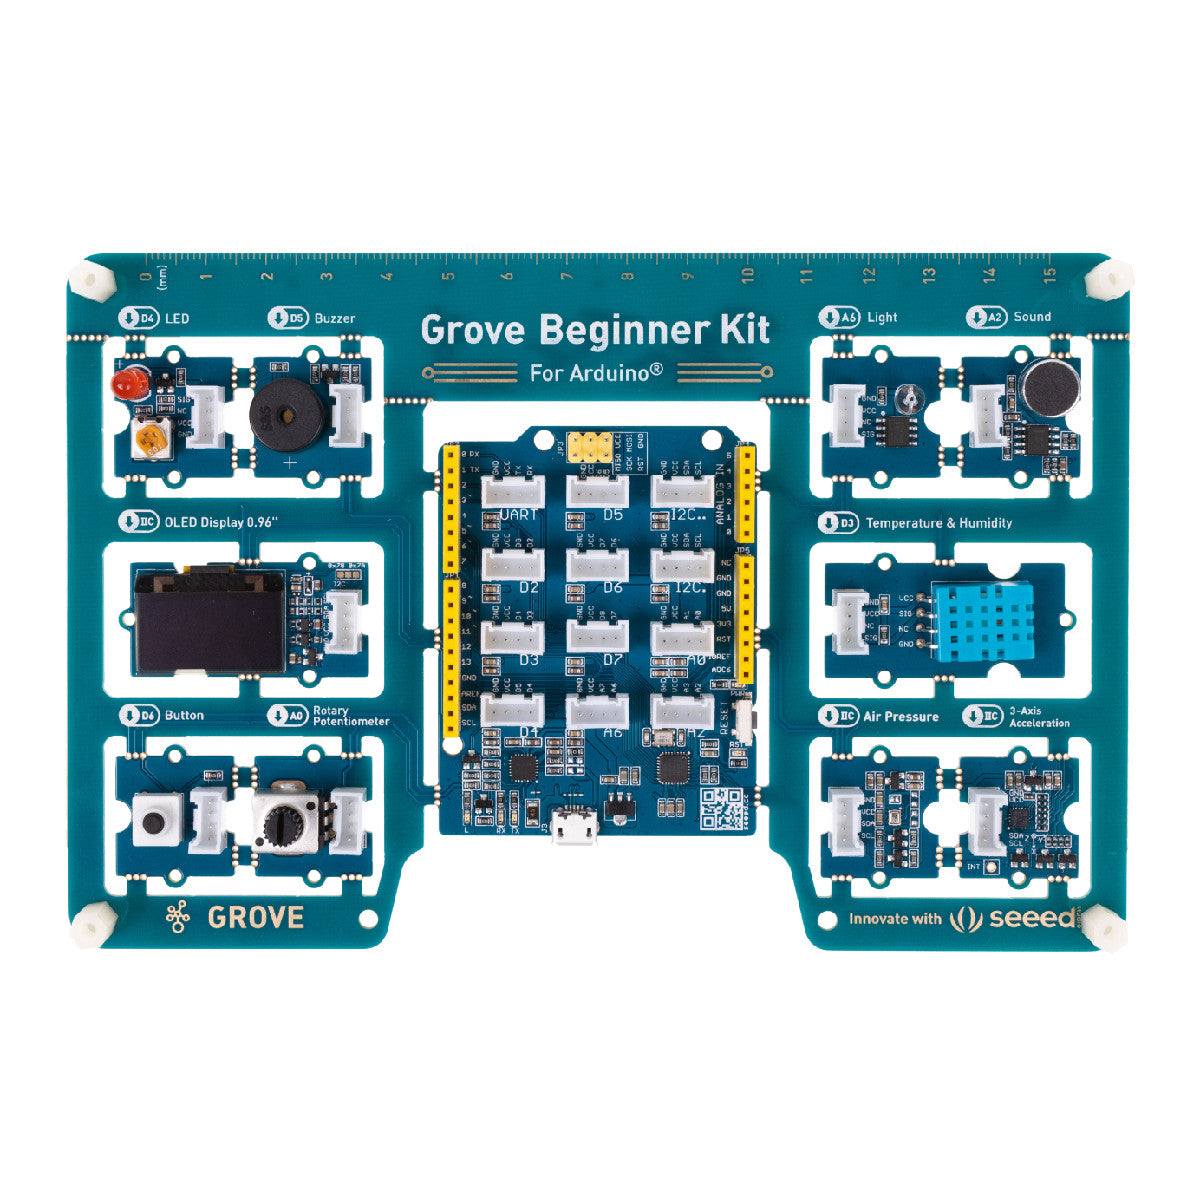 Seeed Studio Grove Beginner Kit for Arduino, All-in-one Arduino Compatible Board with 10 Sensors and 12 Projects